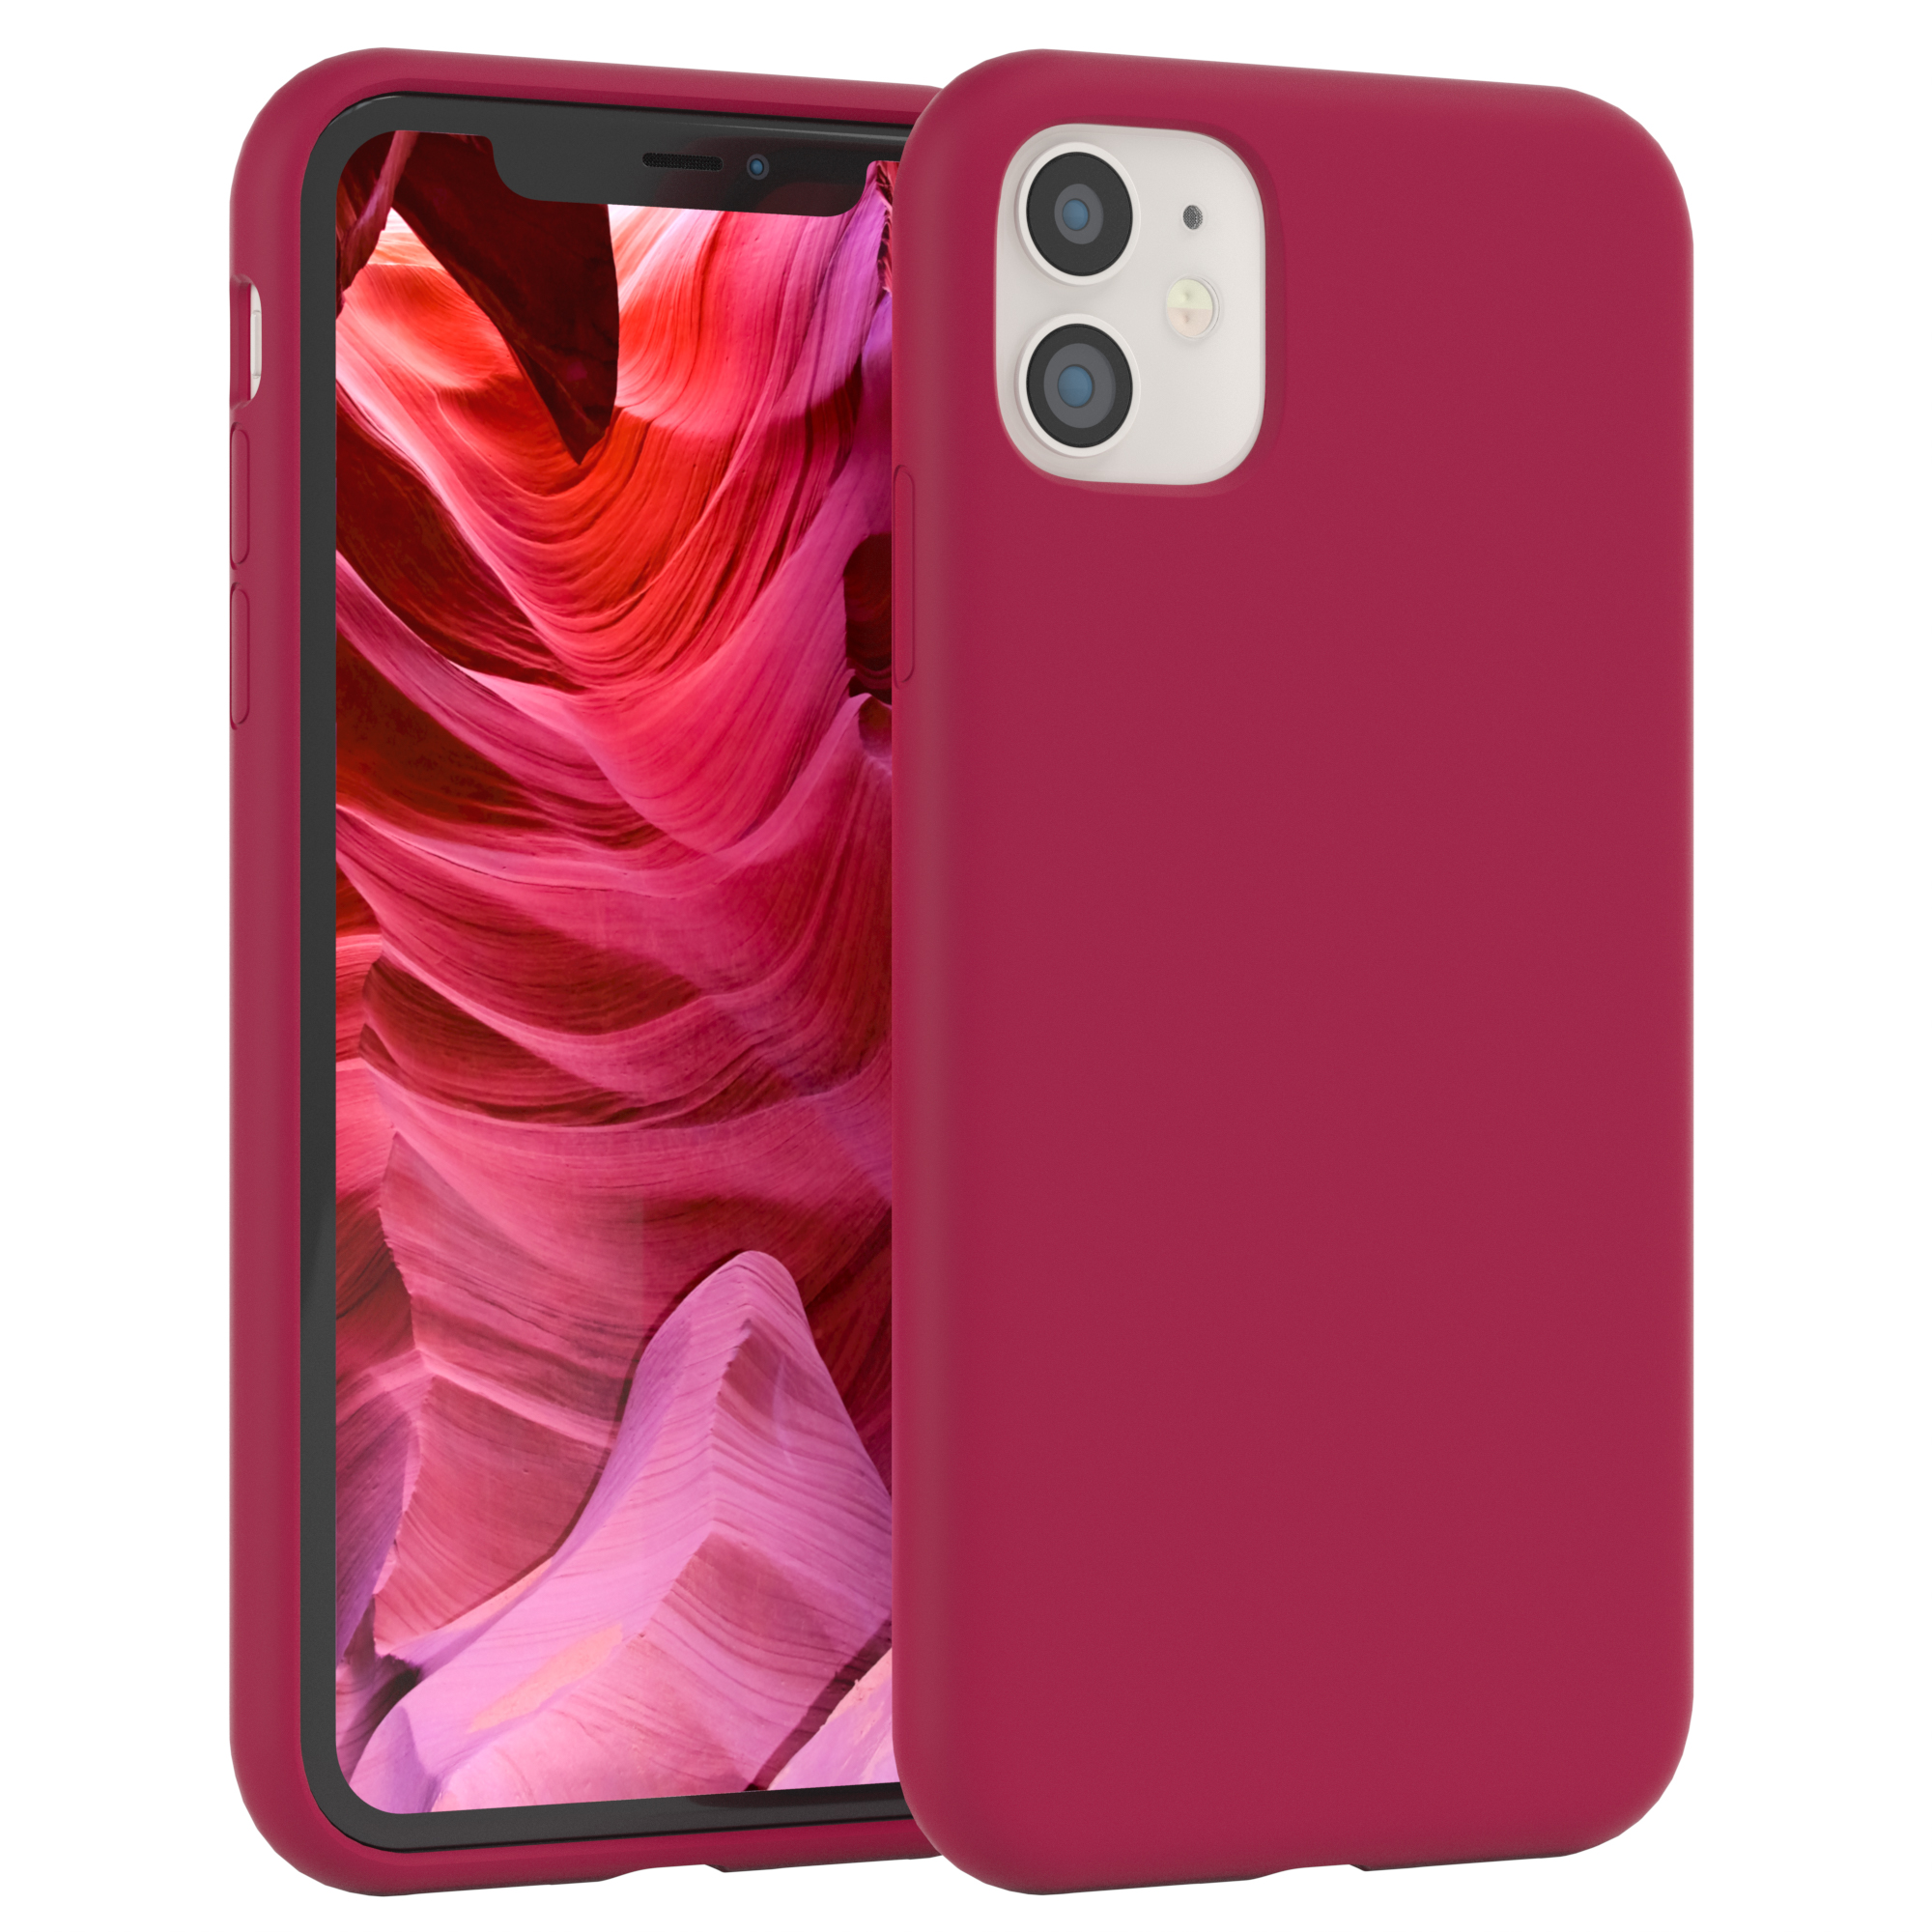 CASE / Apple, EAZY Silikon Handycase, 11, Backcover, Premium Beere Rot iPhone